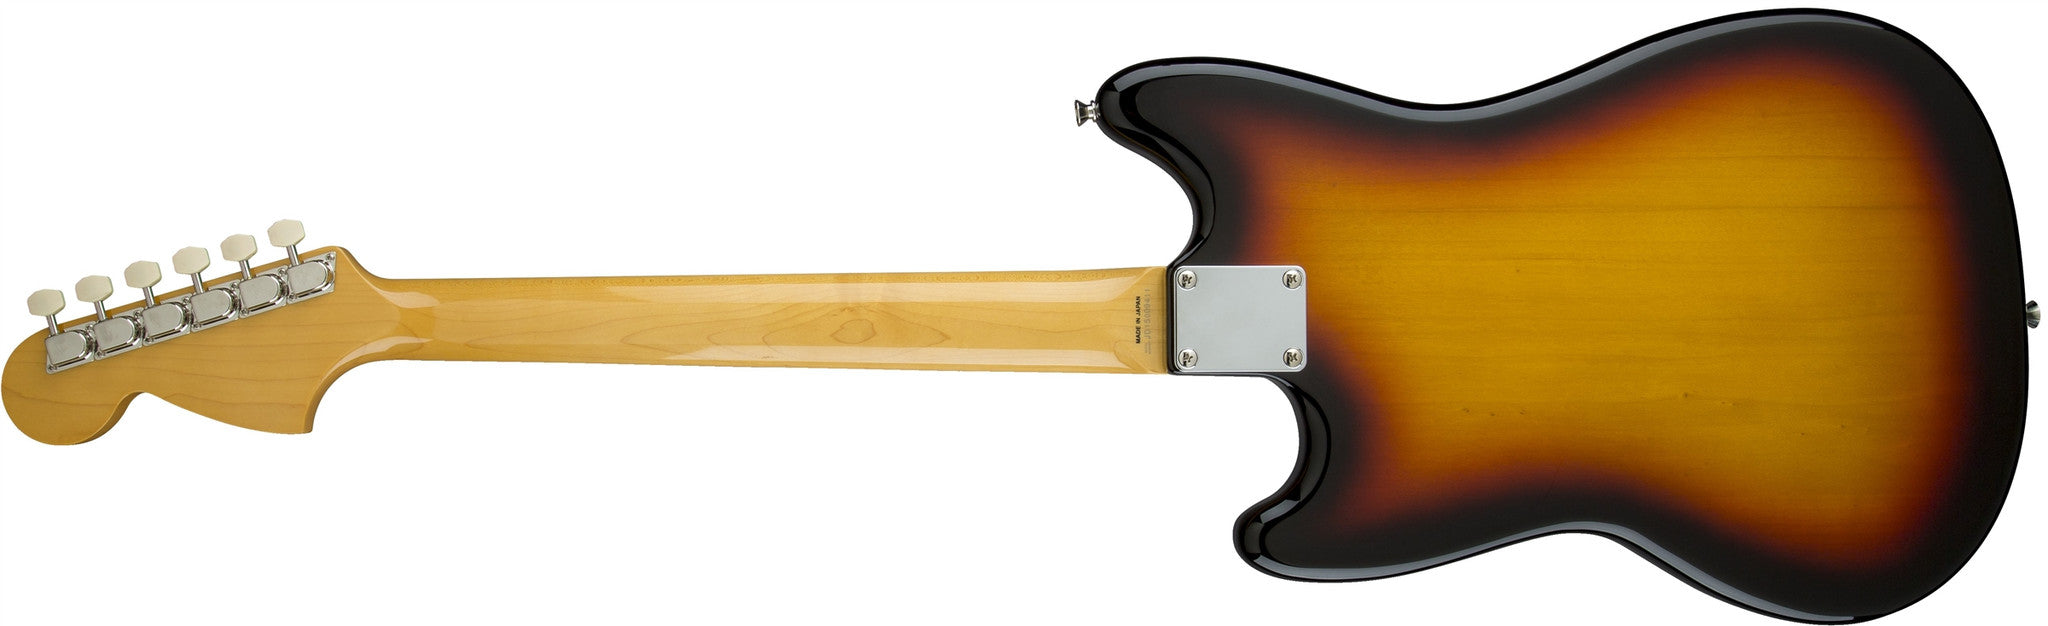 Fender '65 Mustang®, Rosewood Fingerboard, 3 Color Sunburst 0273706500 - L.A. Music - Canada's Favourite Music Store!